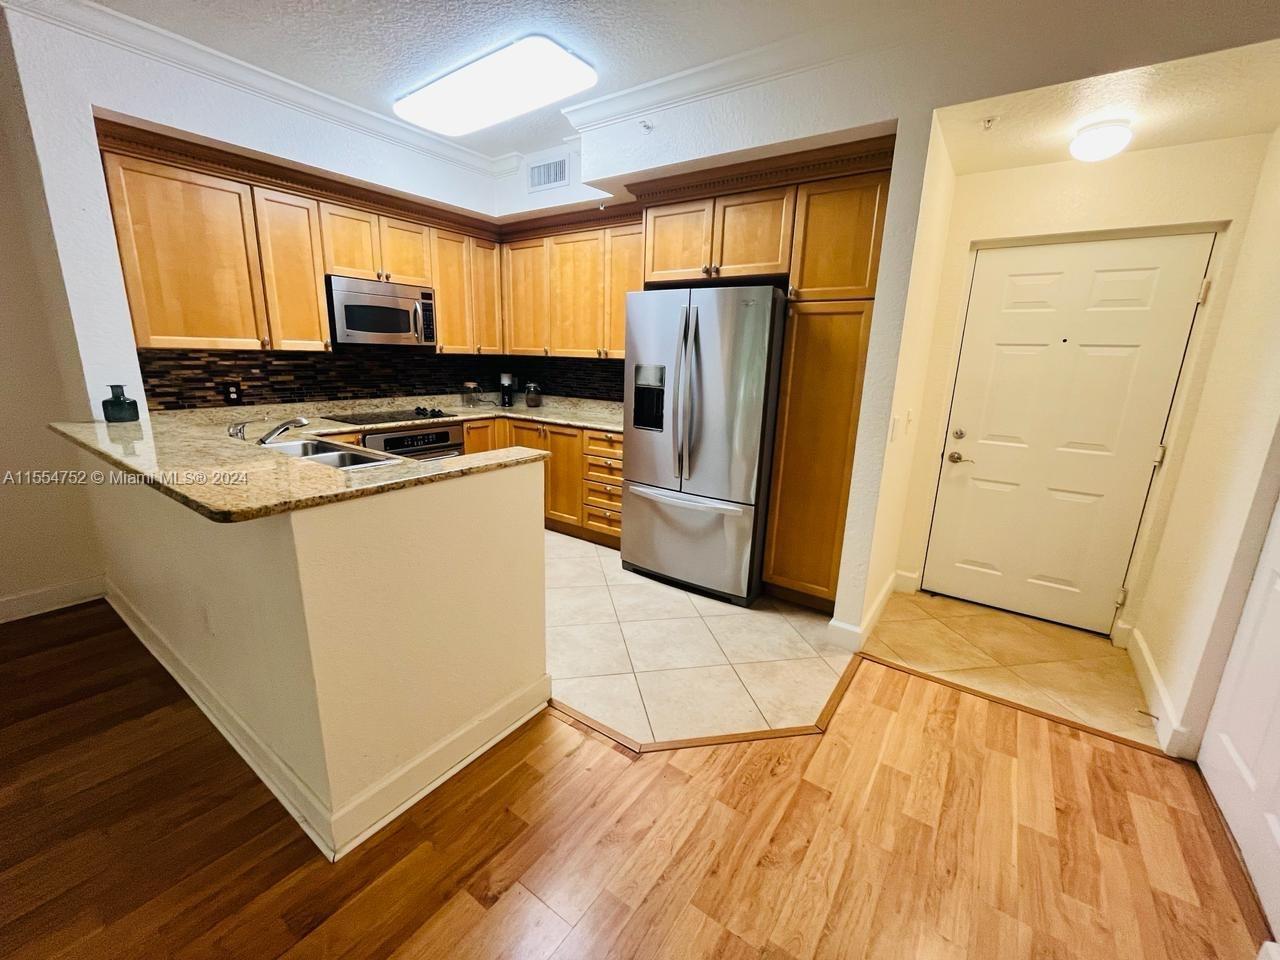 SPACIOUS 1 BED 1 BATH! GRANITE COUNTERTOP, STAINLESS STEEL APPLIANCES, WASHER/DRYER IN UNIT & PRIVAT